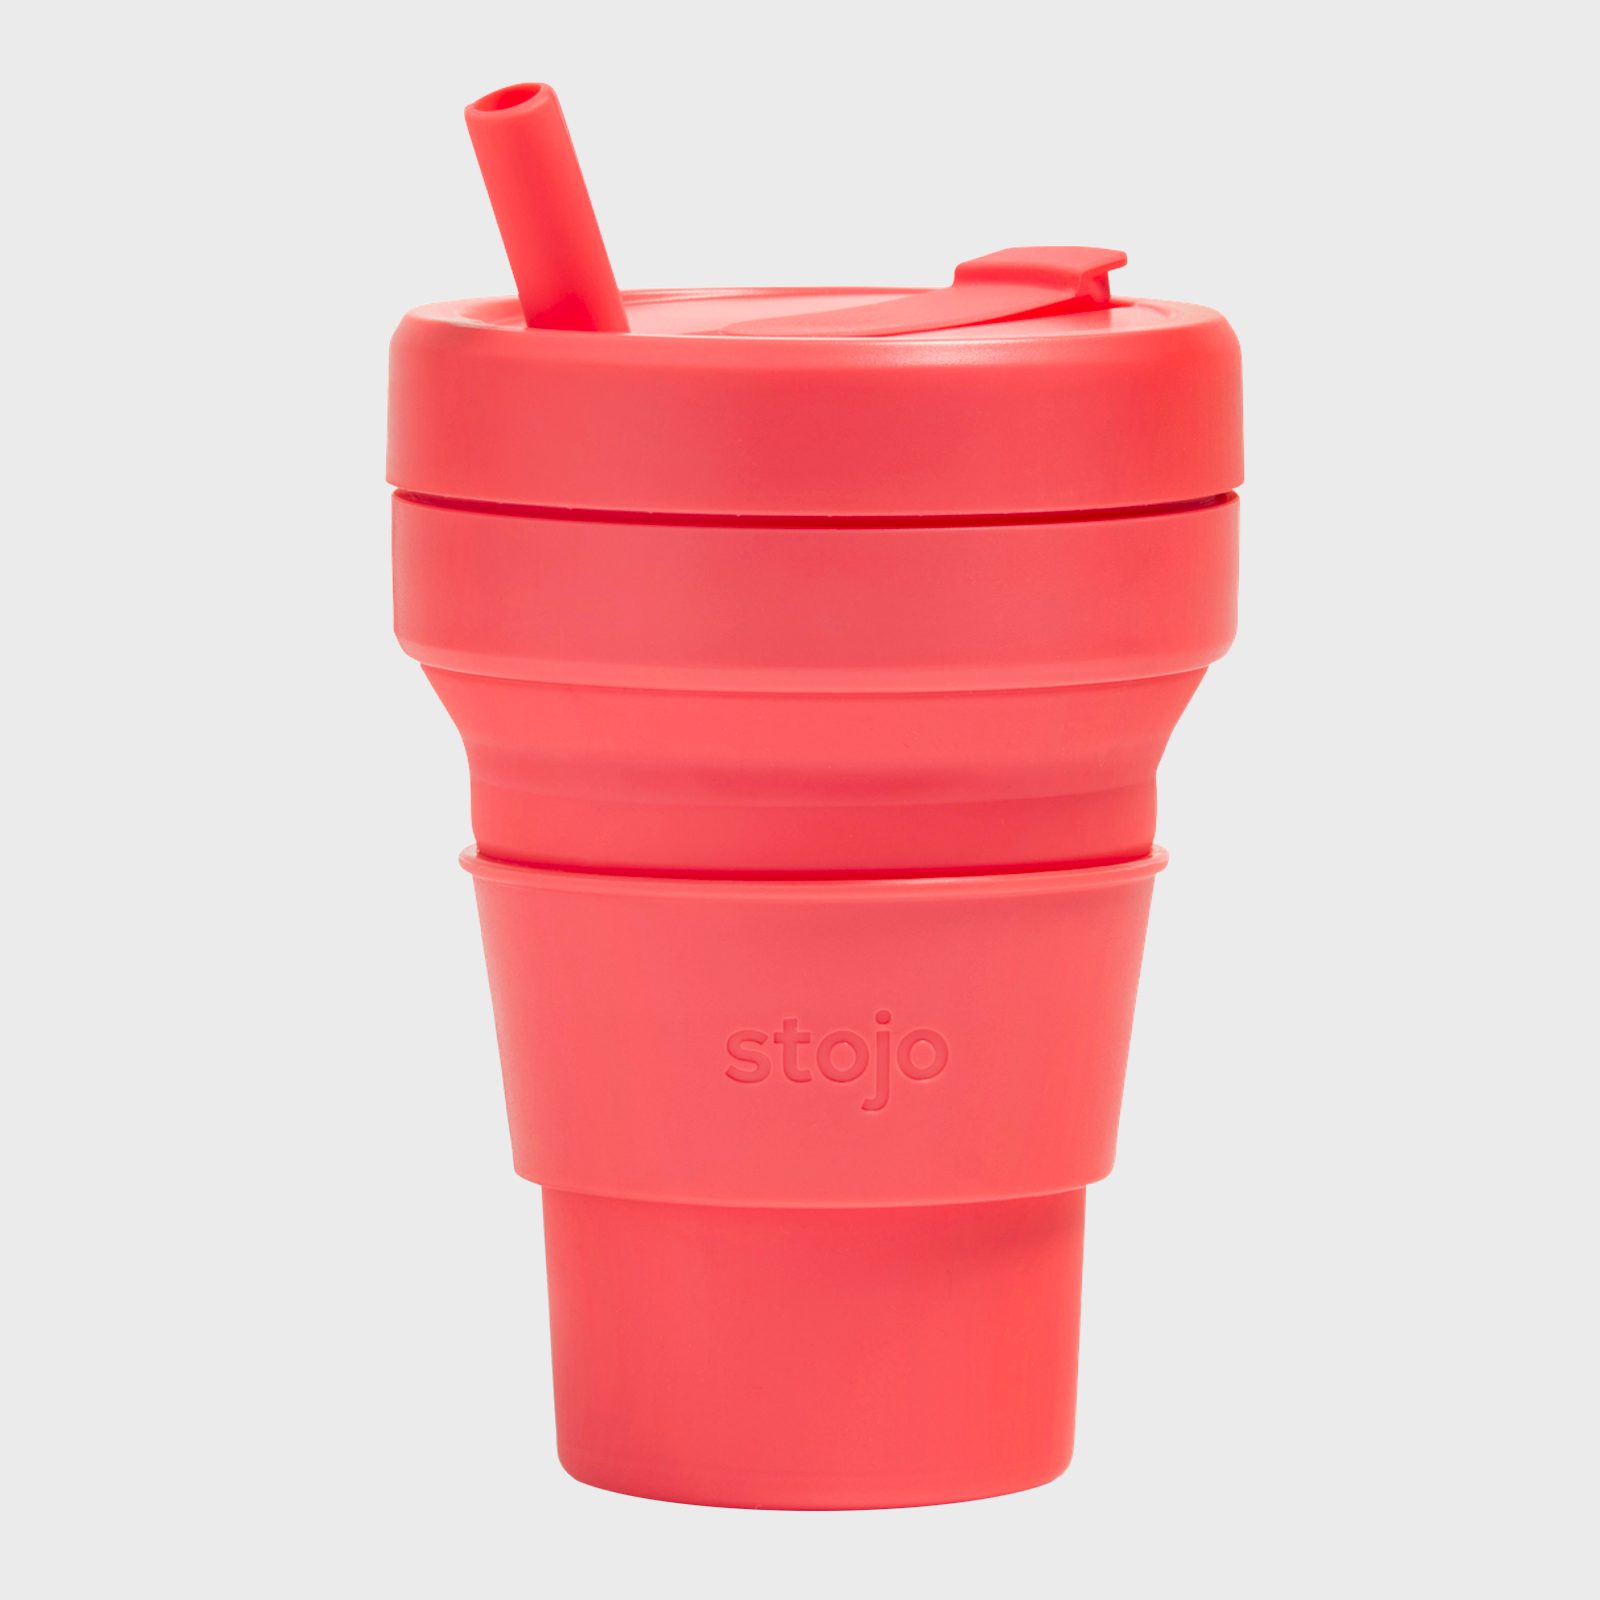 https://www.rd.com/wp-content/uploads/2022/05/RD-15-Best-Reusable-Coffee-Cups-Ecomm-Stojo.jpg?fit=700%2C700